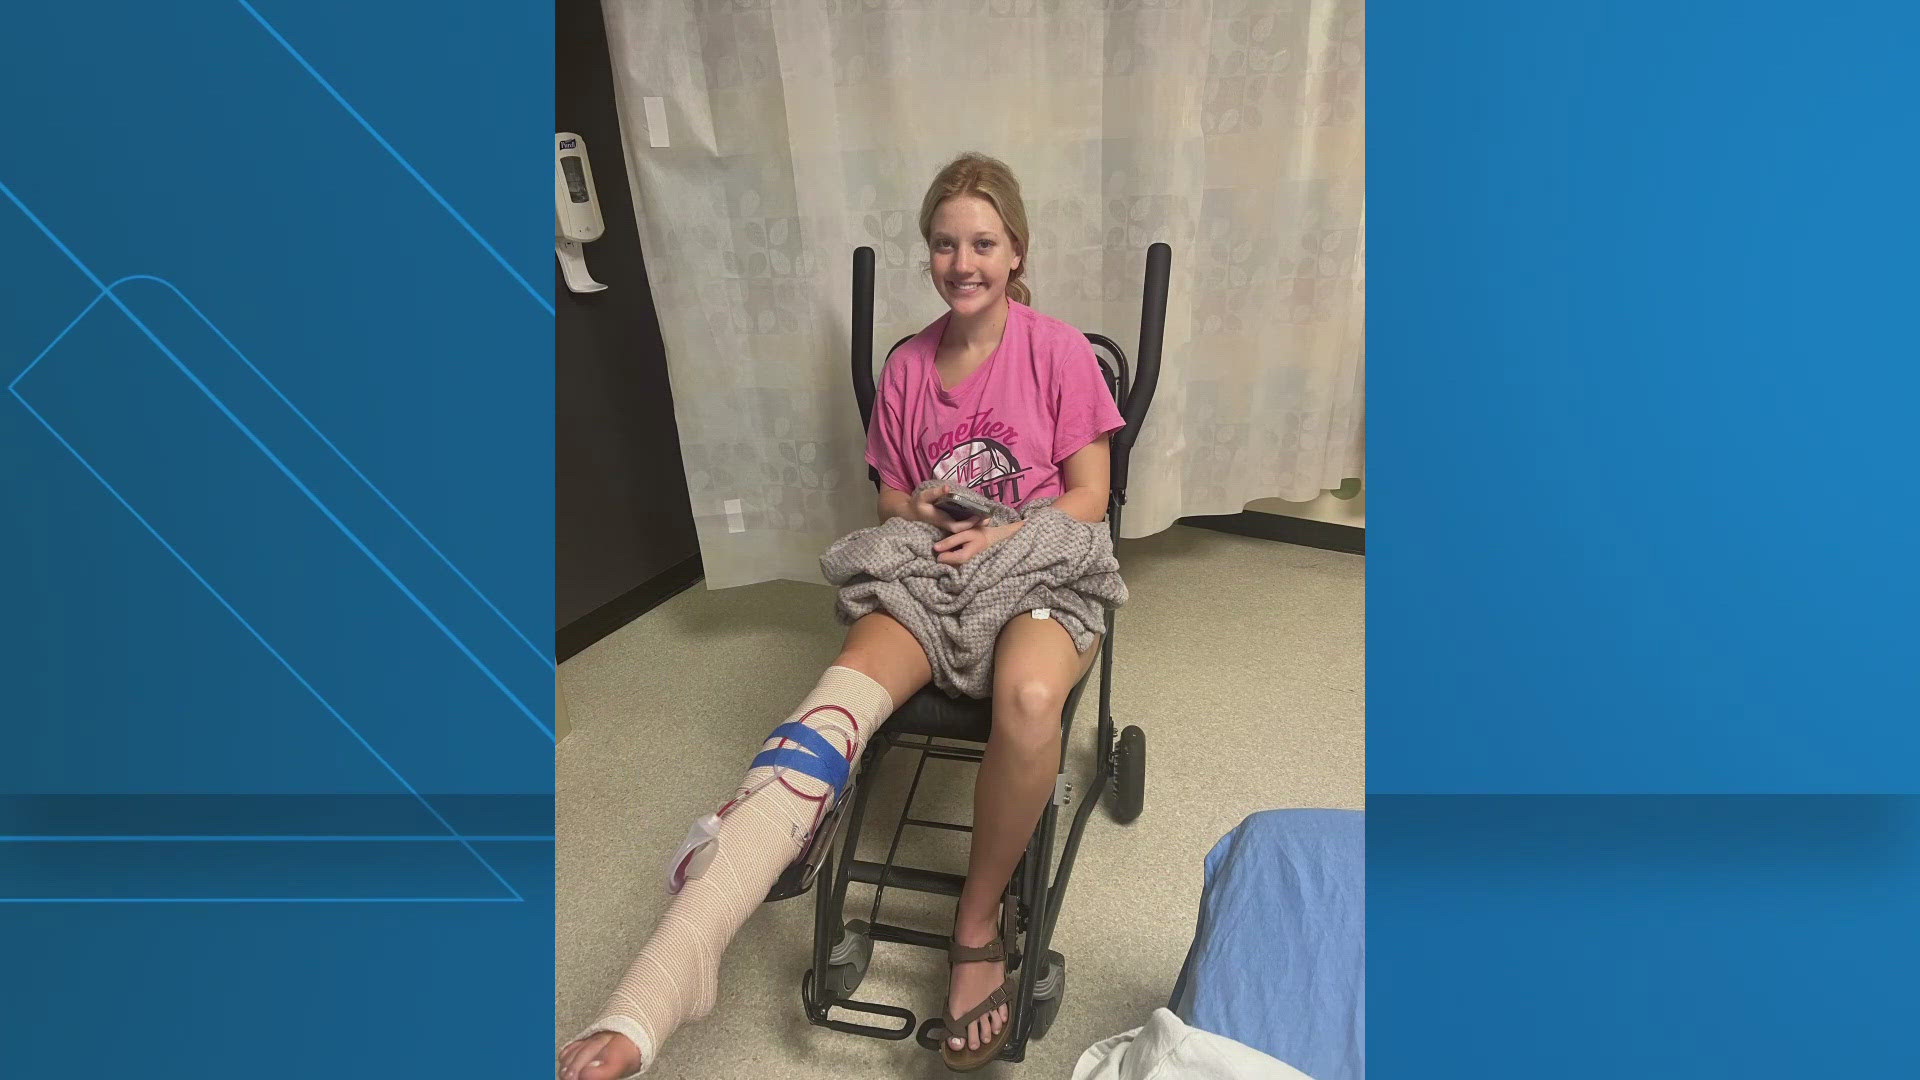 Two years ago, Emmie Vacek had her whole leg split open from an ATV accident. Now that she's healed, she wishes nobody has to go through the same recovery process.